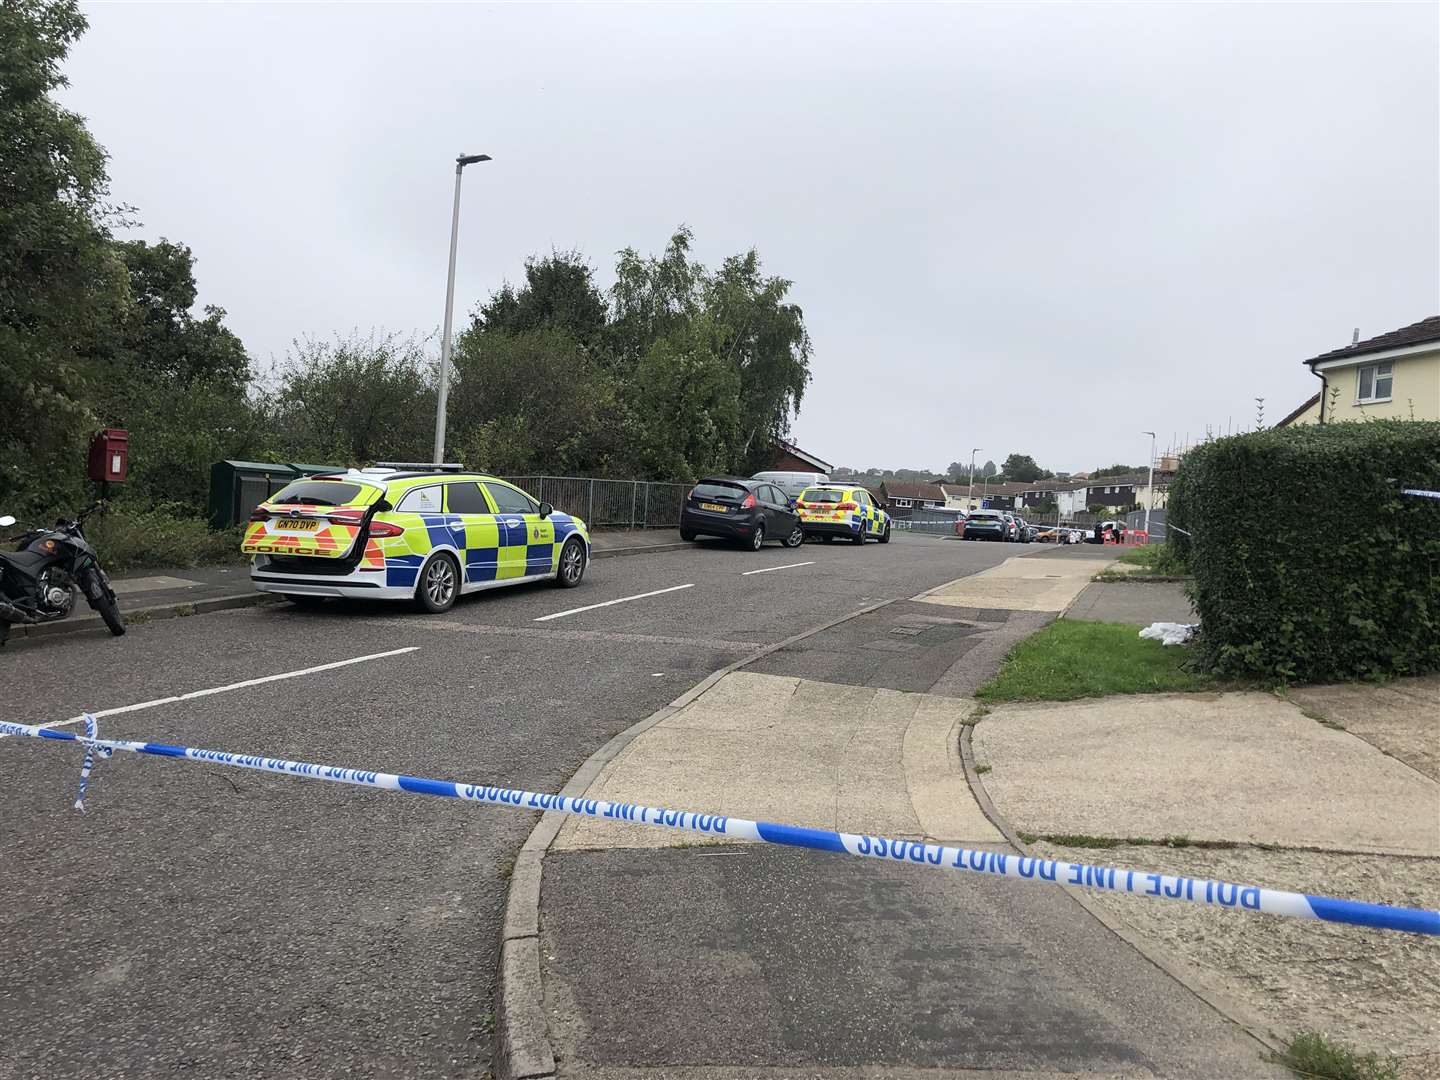 Police have cordoned off a large area around Wiltshire Close in Chatham